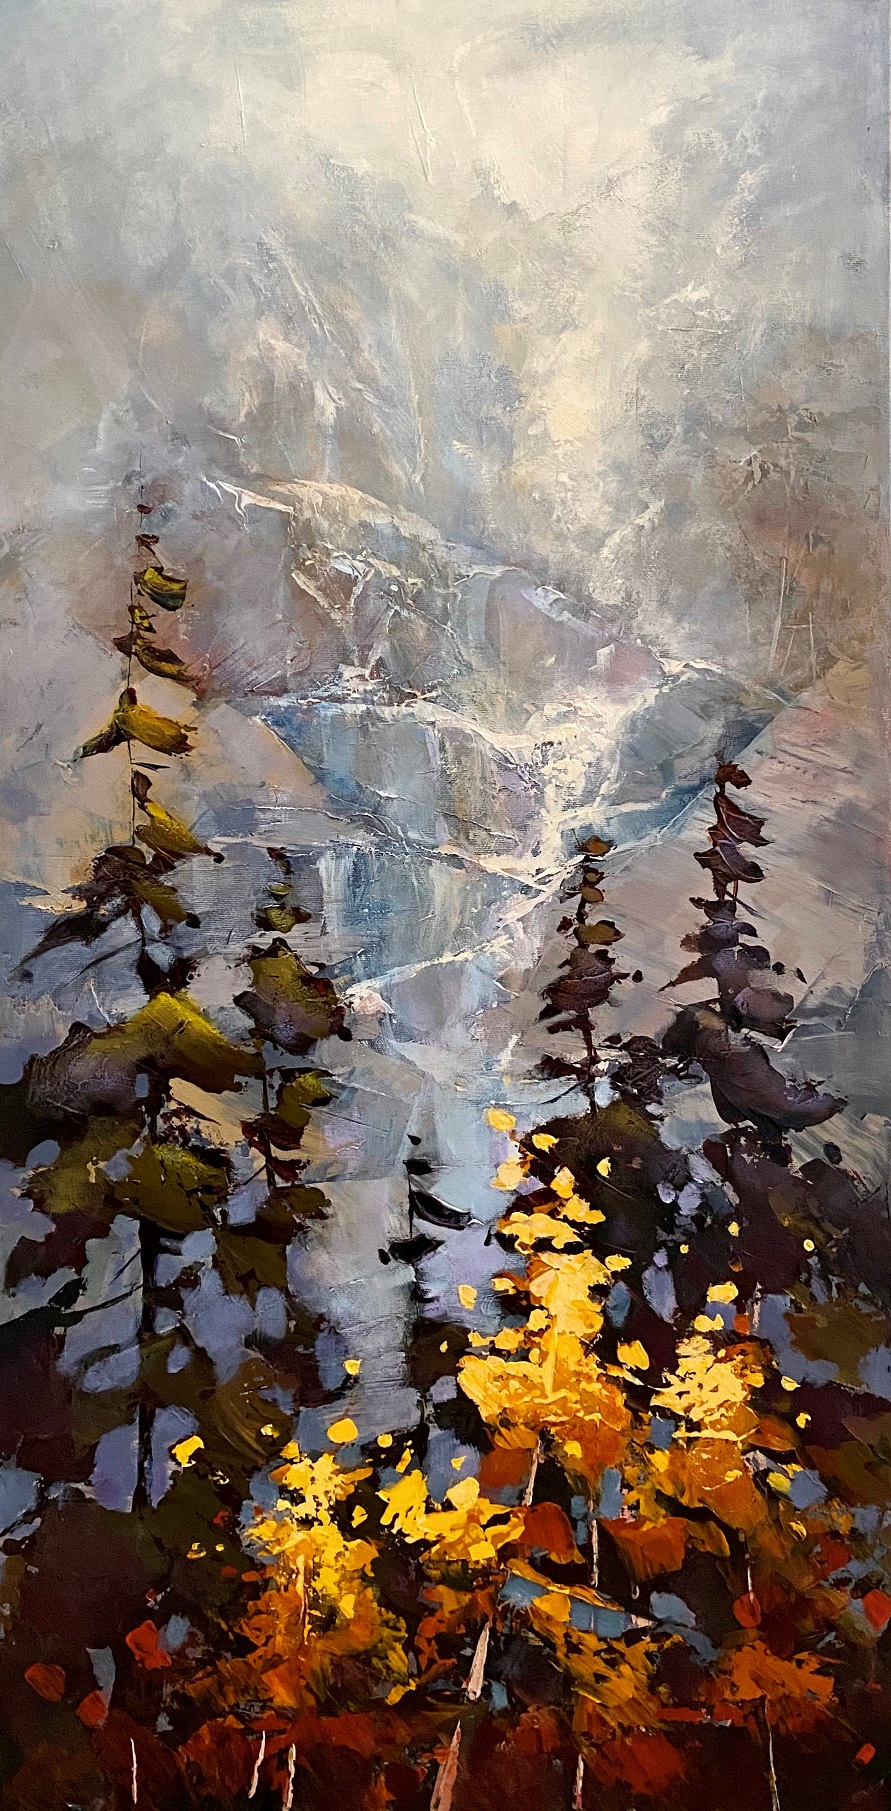 Autumn Below by Linda Wilder at The Avenue Gallery, a contemporary fine art gallery in Victoria, BC, Canada.